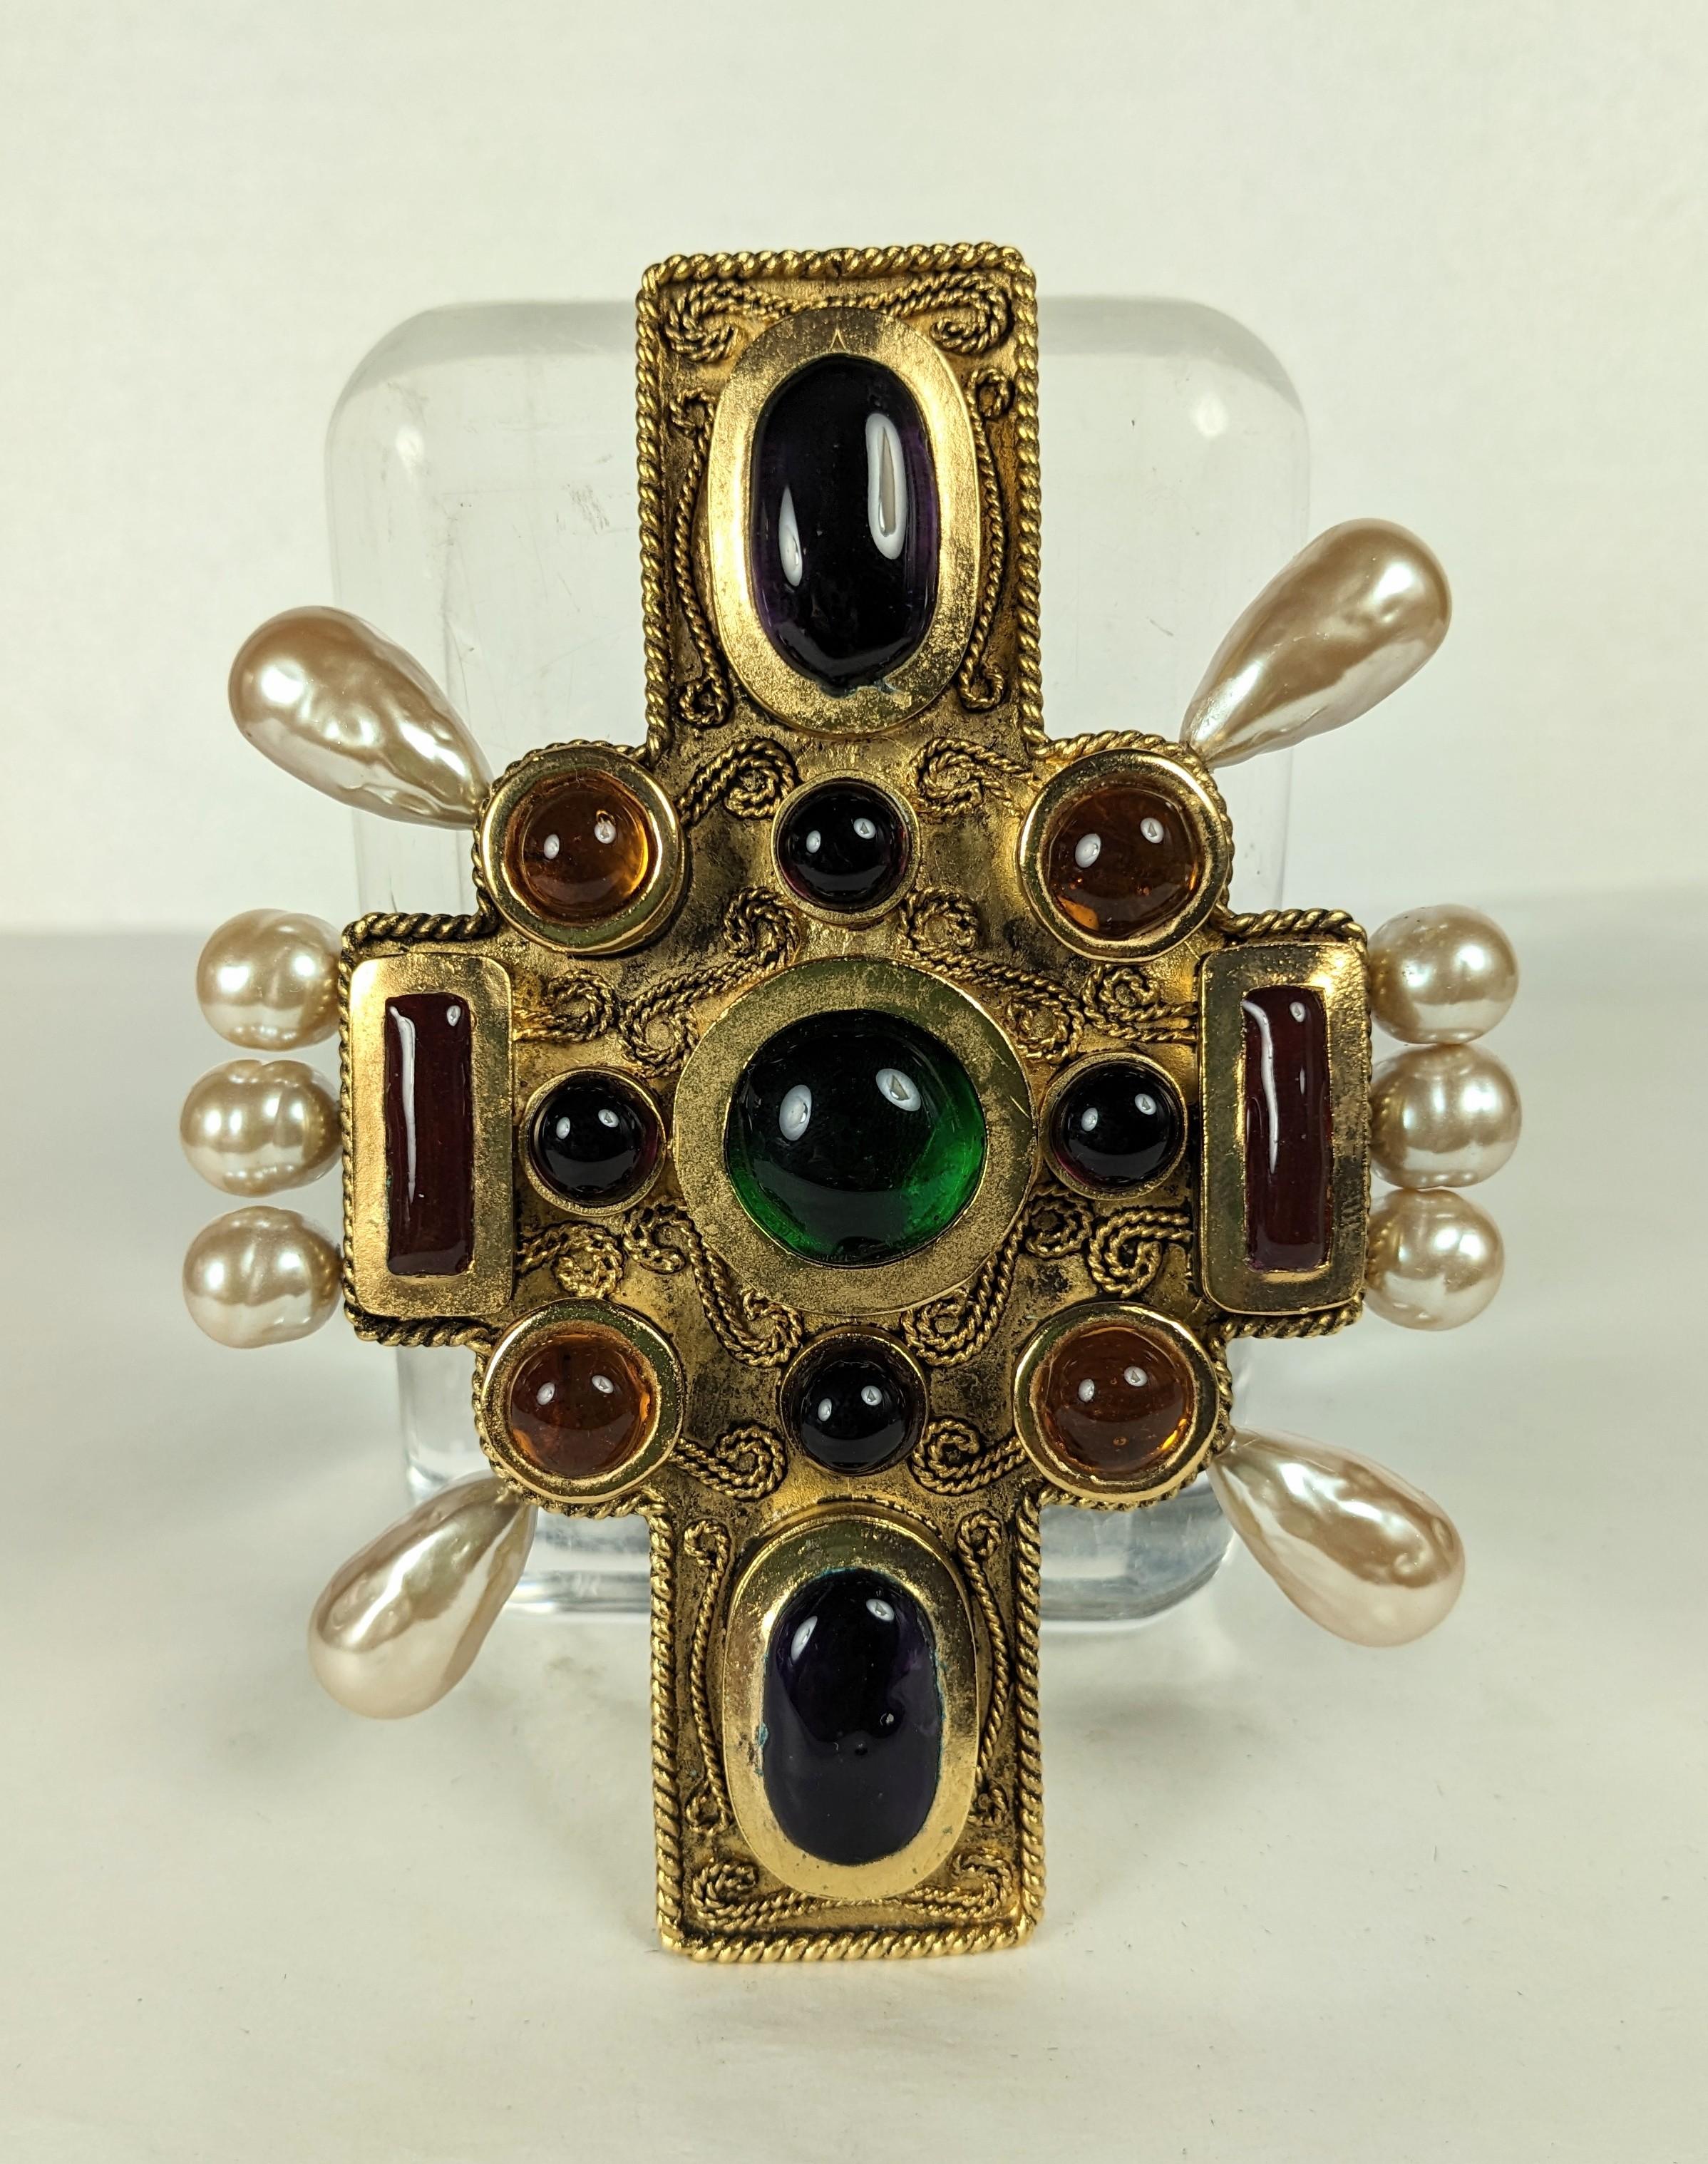 Massive Chanel Cross Brooch in shades of emerald, ruby, topaz and amythest poured glass cabocheons with faux baroque round and pear shape pearls. Intricate scrolled wirework design on antique gold finish. There is a loop in back for a chain as